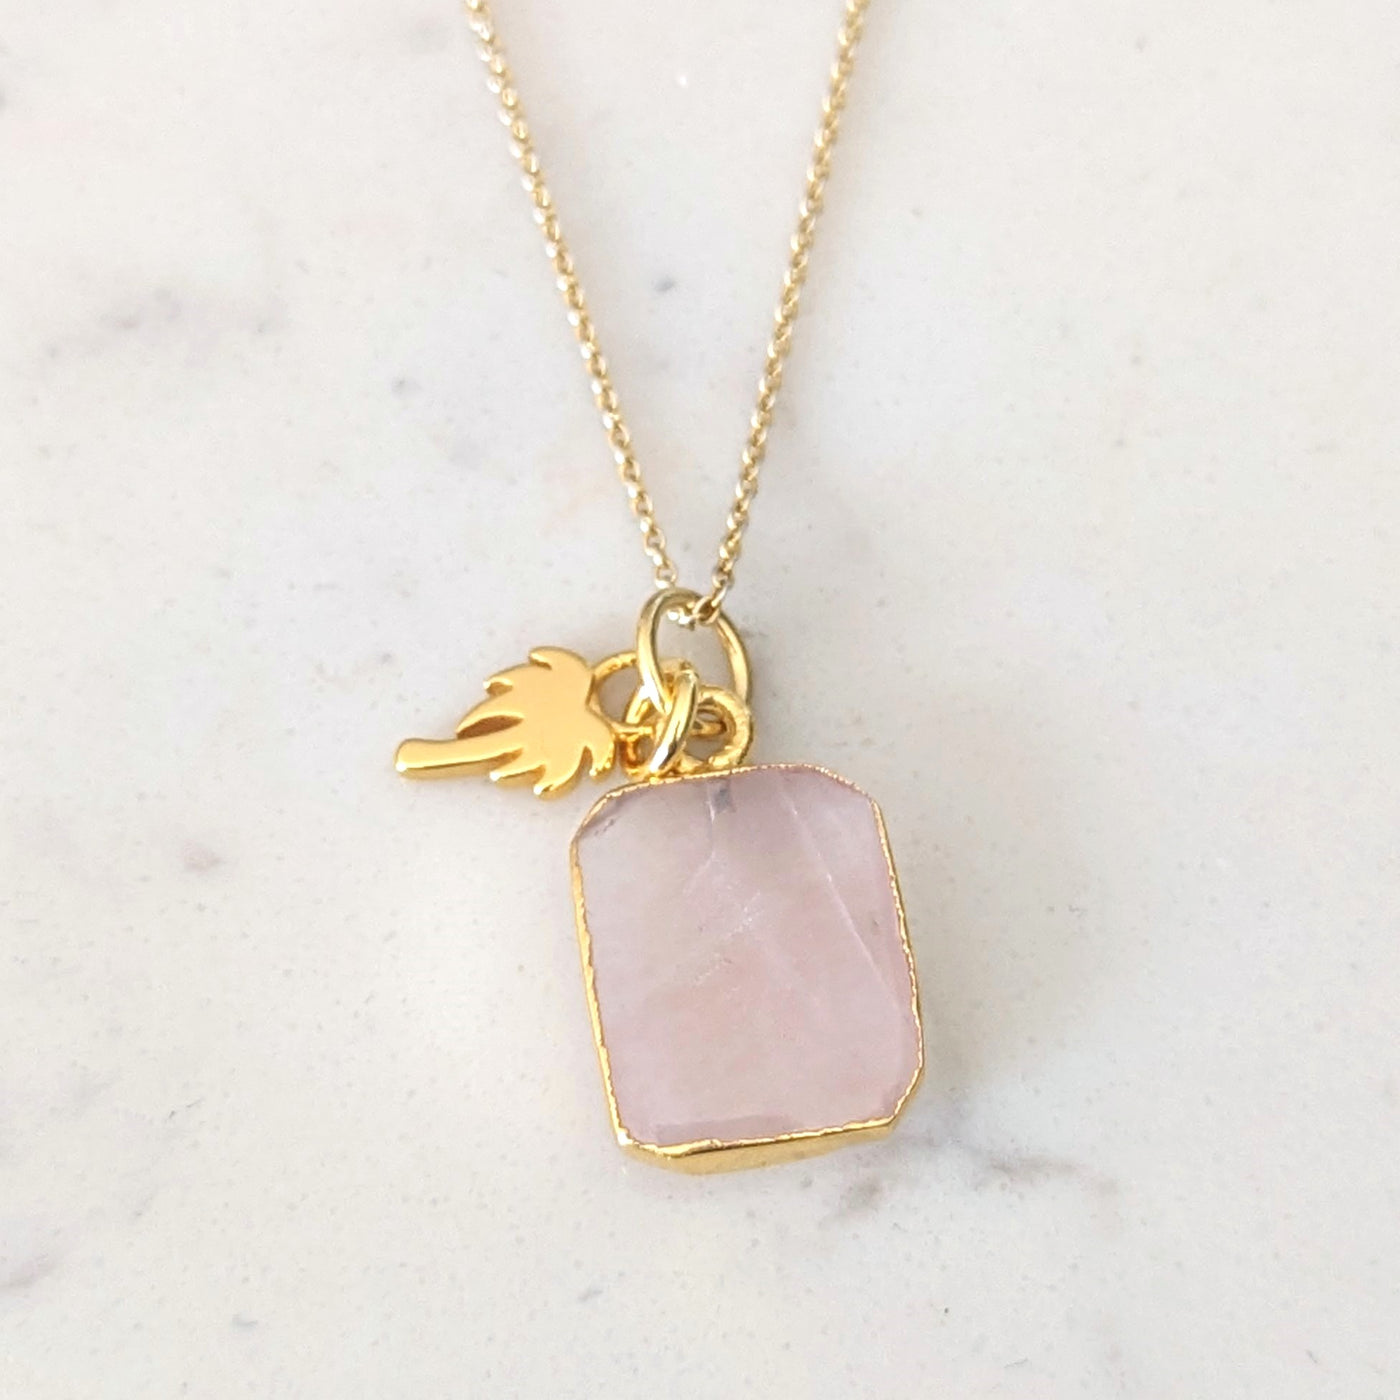 The Duo Rose Quartz Necklace - 18ct Gold Plated